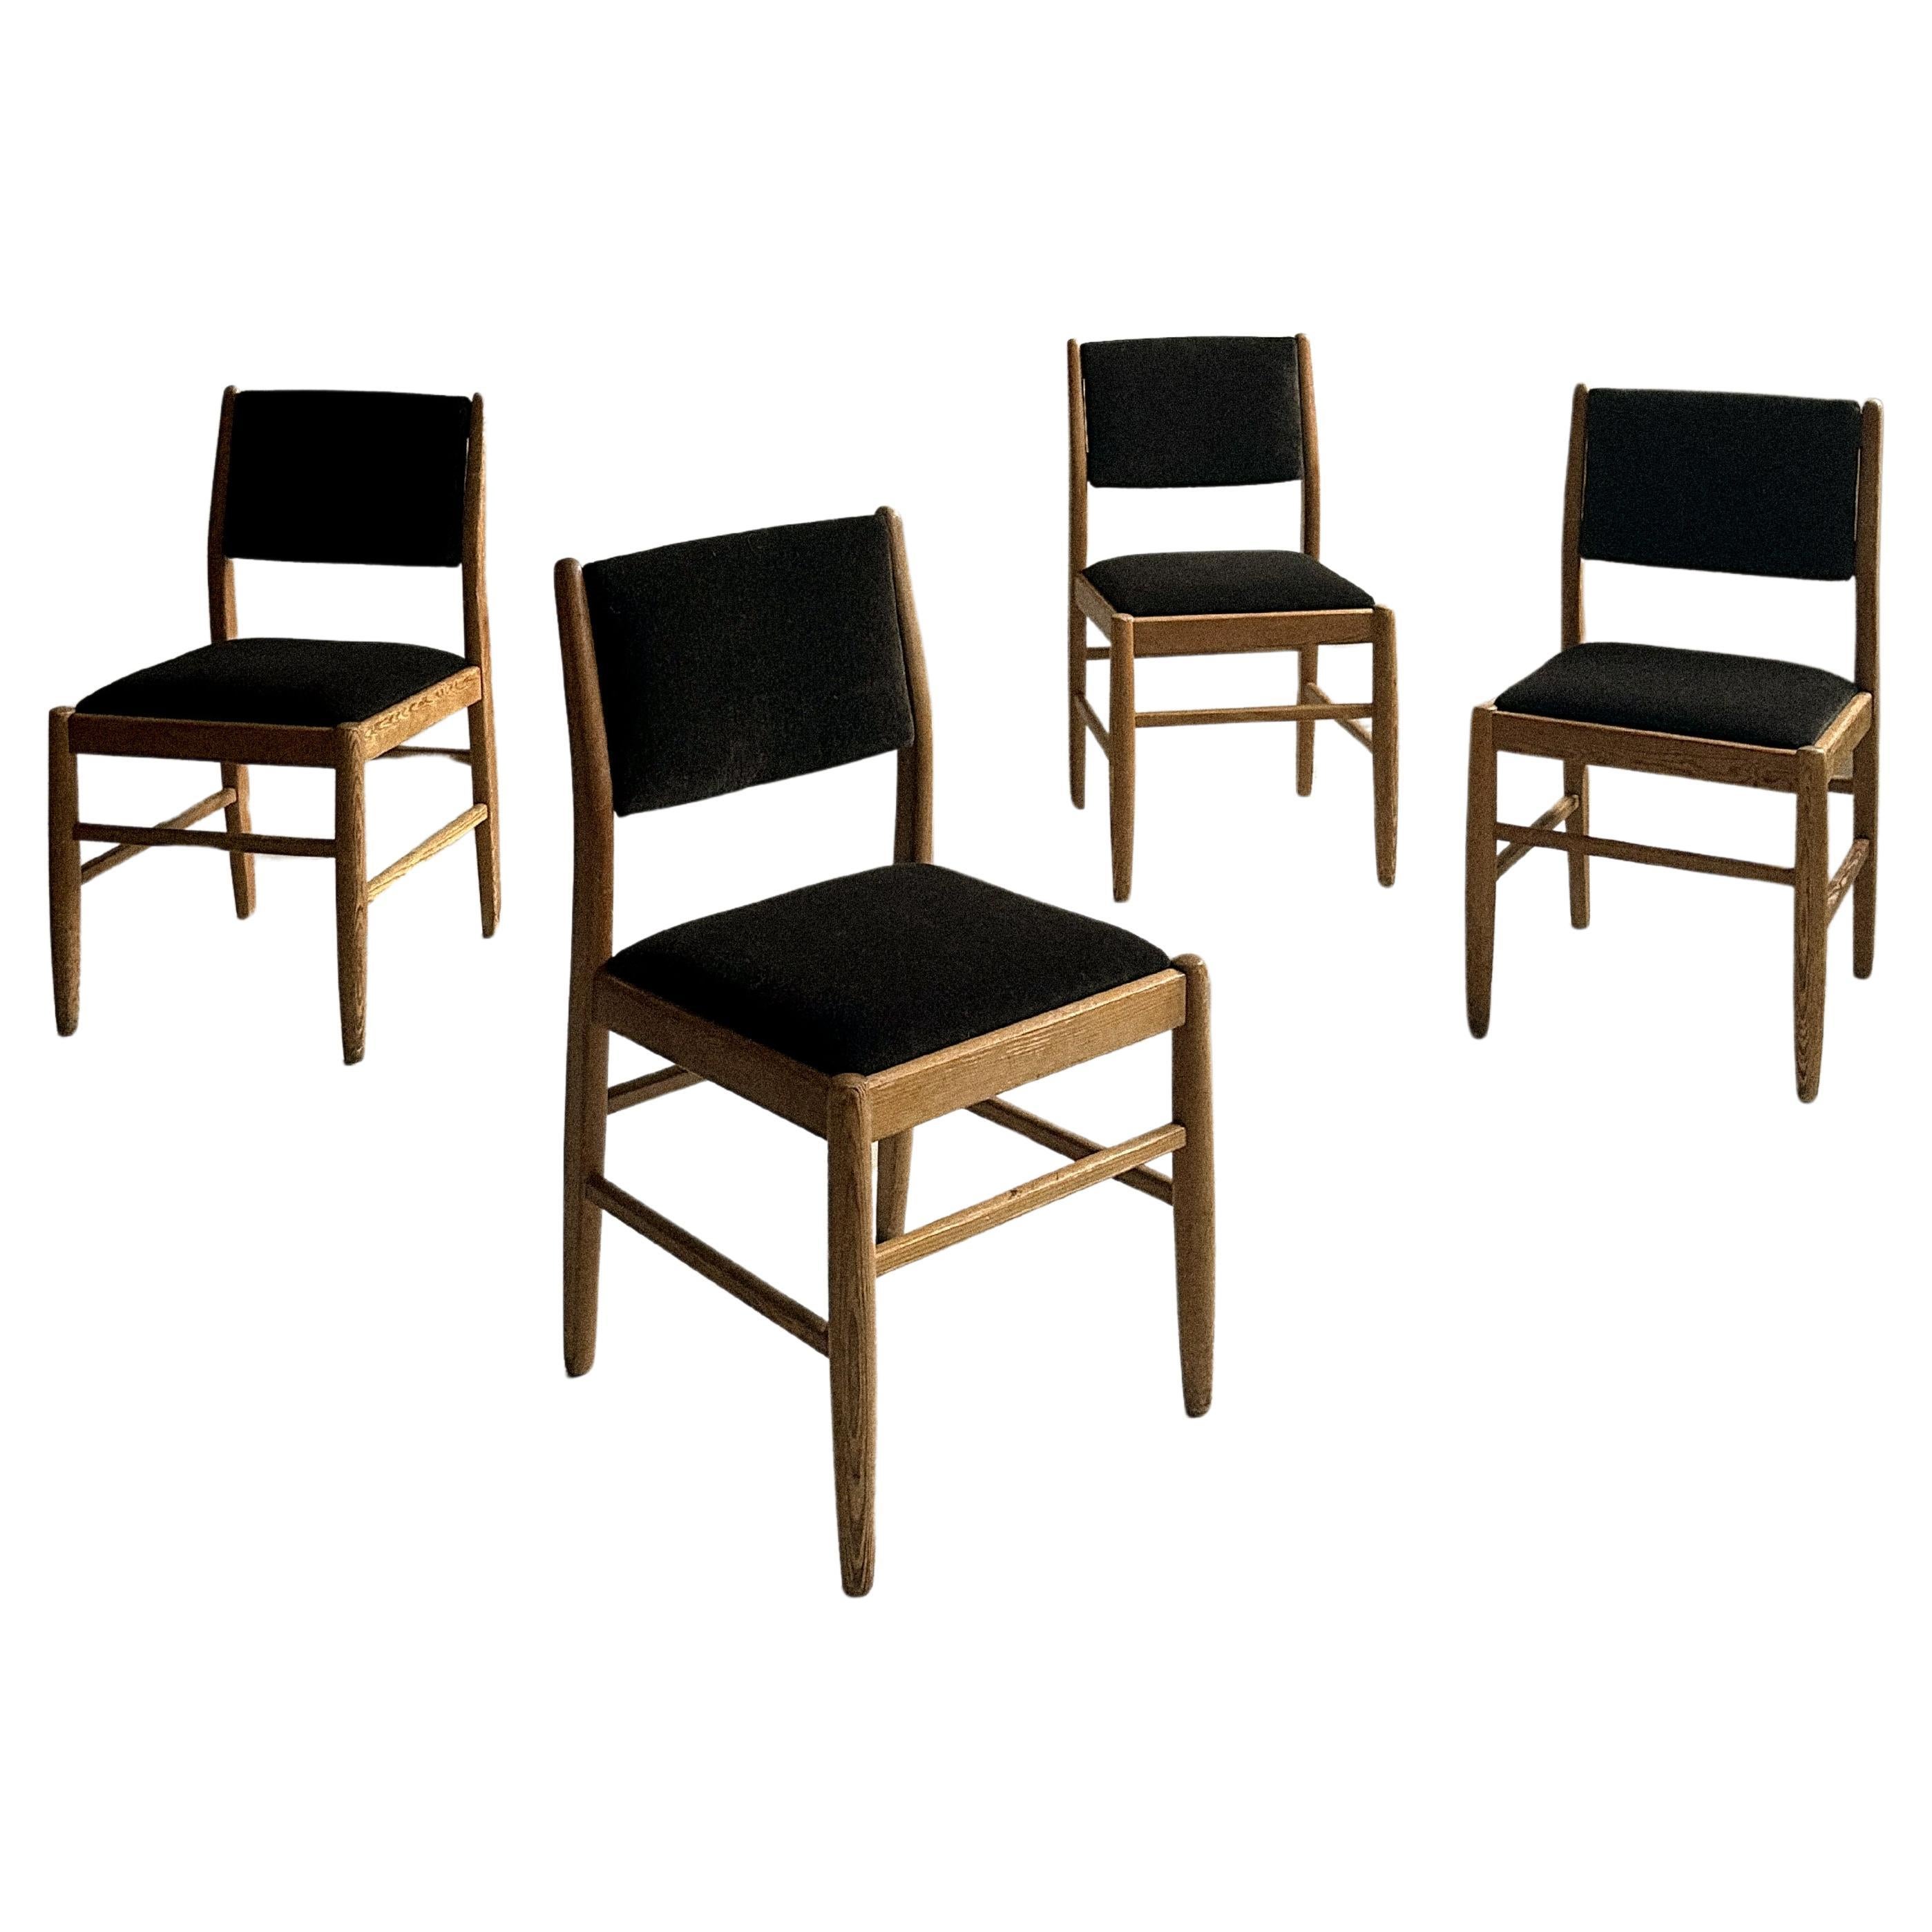 A Set of 4 Dining Chairs, Pine and Wool Velour, Scandinavia, c. 1960s 